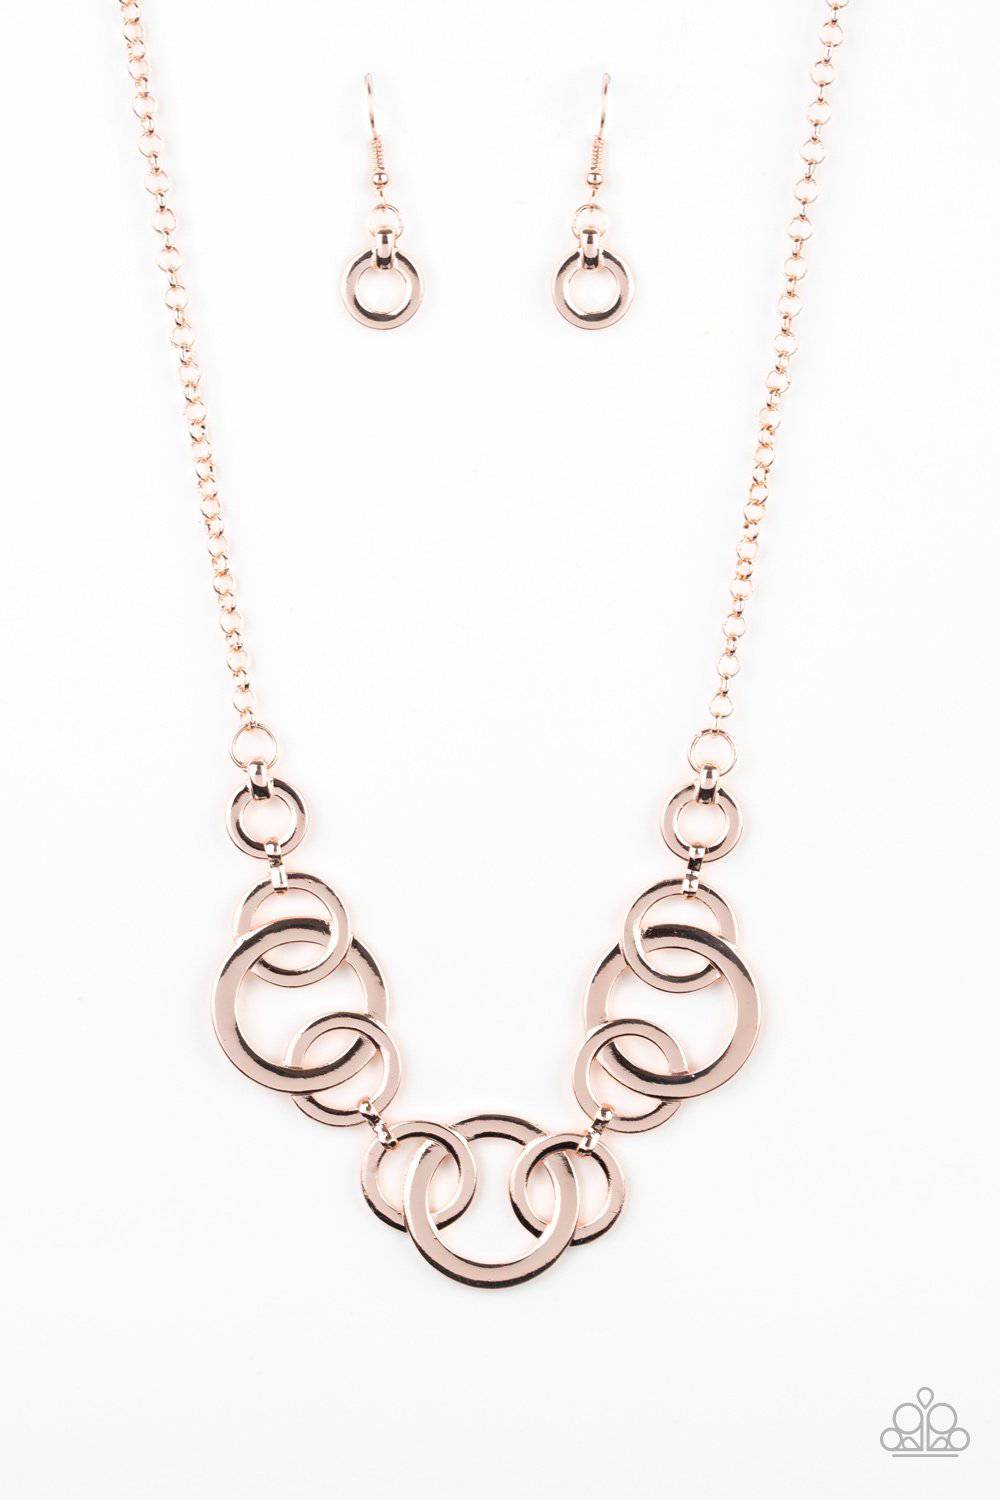 A31 - Going in Circles Necklace by Paparazzi Accessories on Fancy5Fashion.com